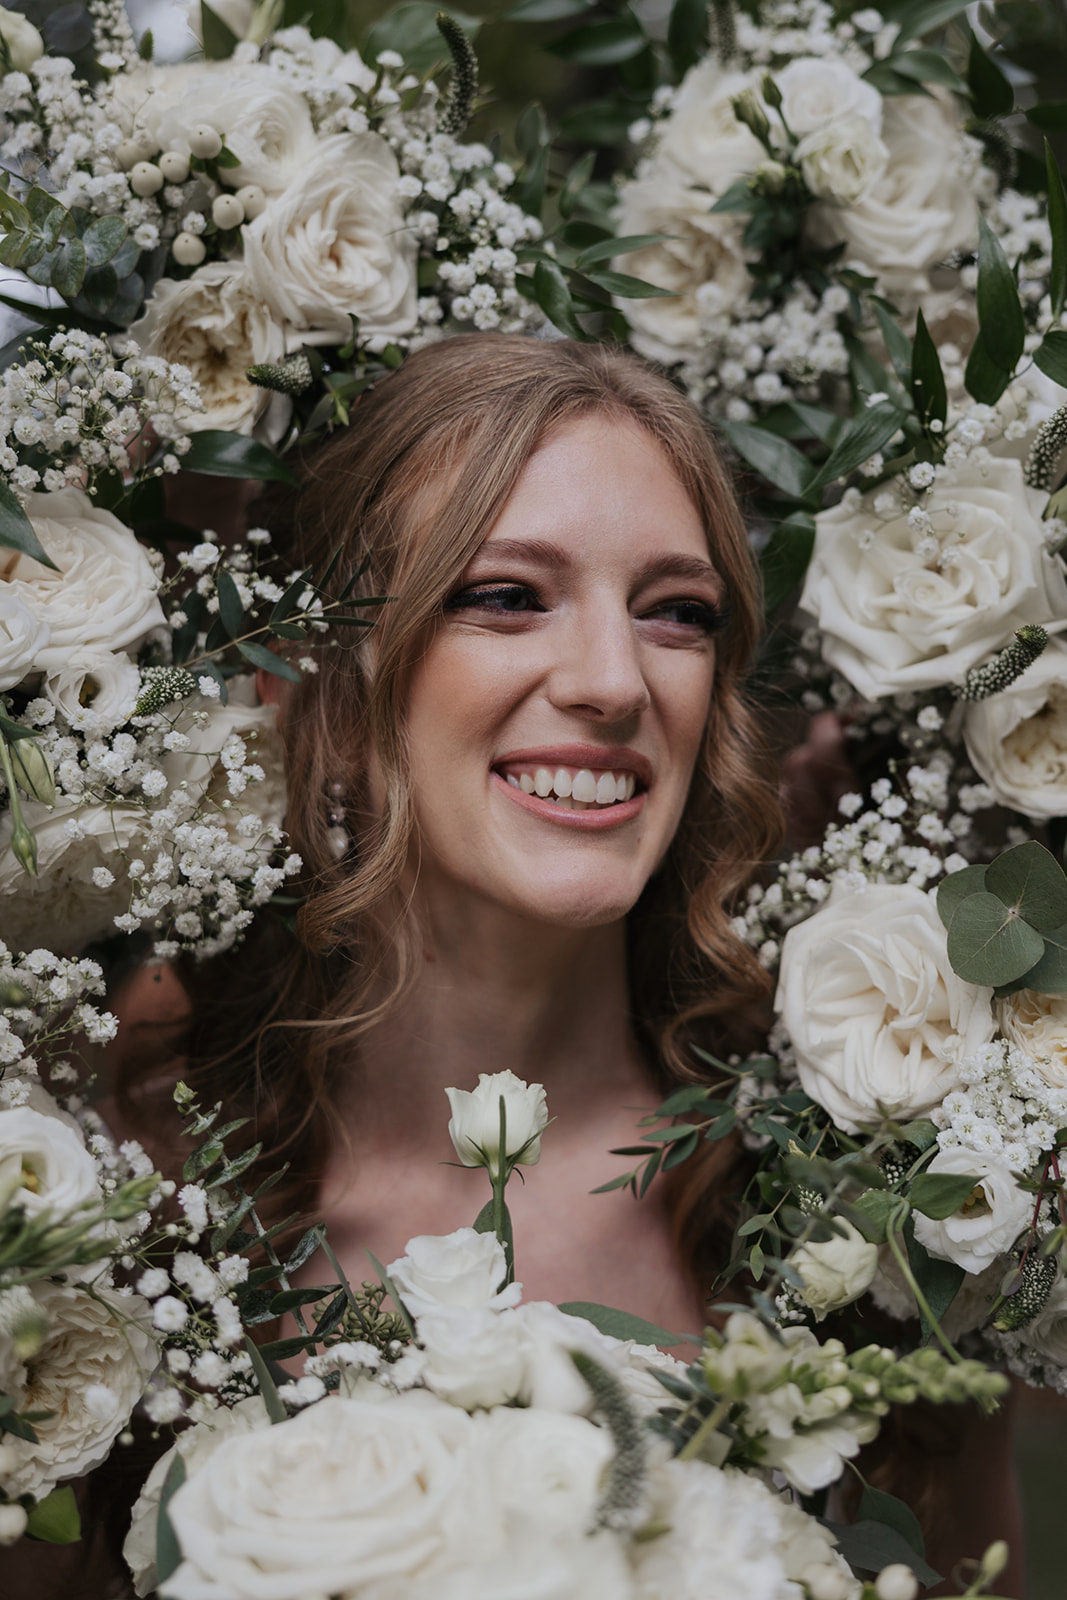 Beautiful bride poses surrounded by flowers